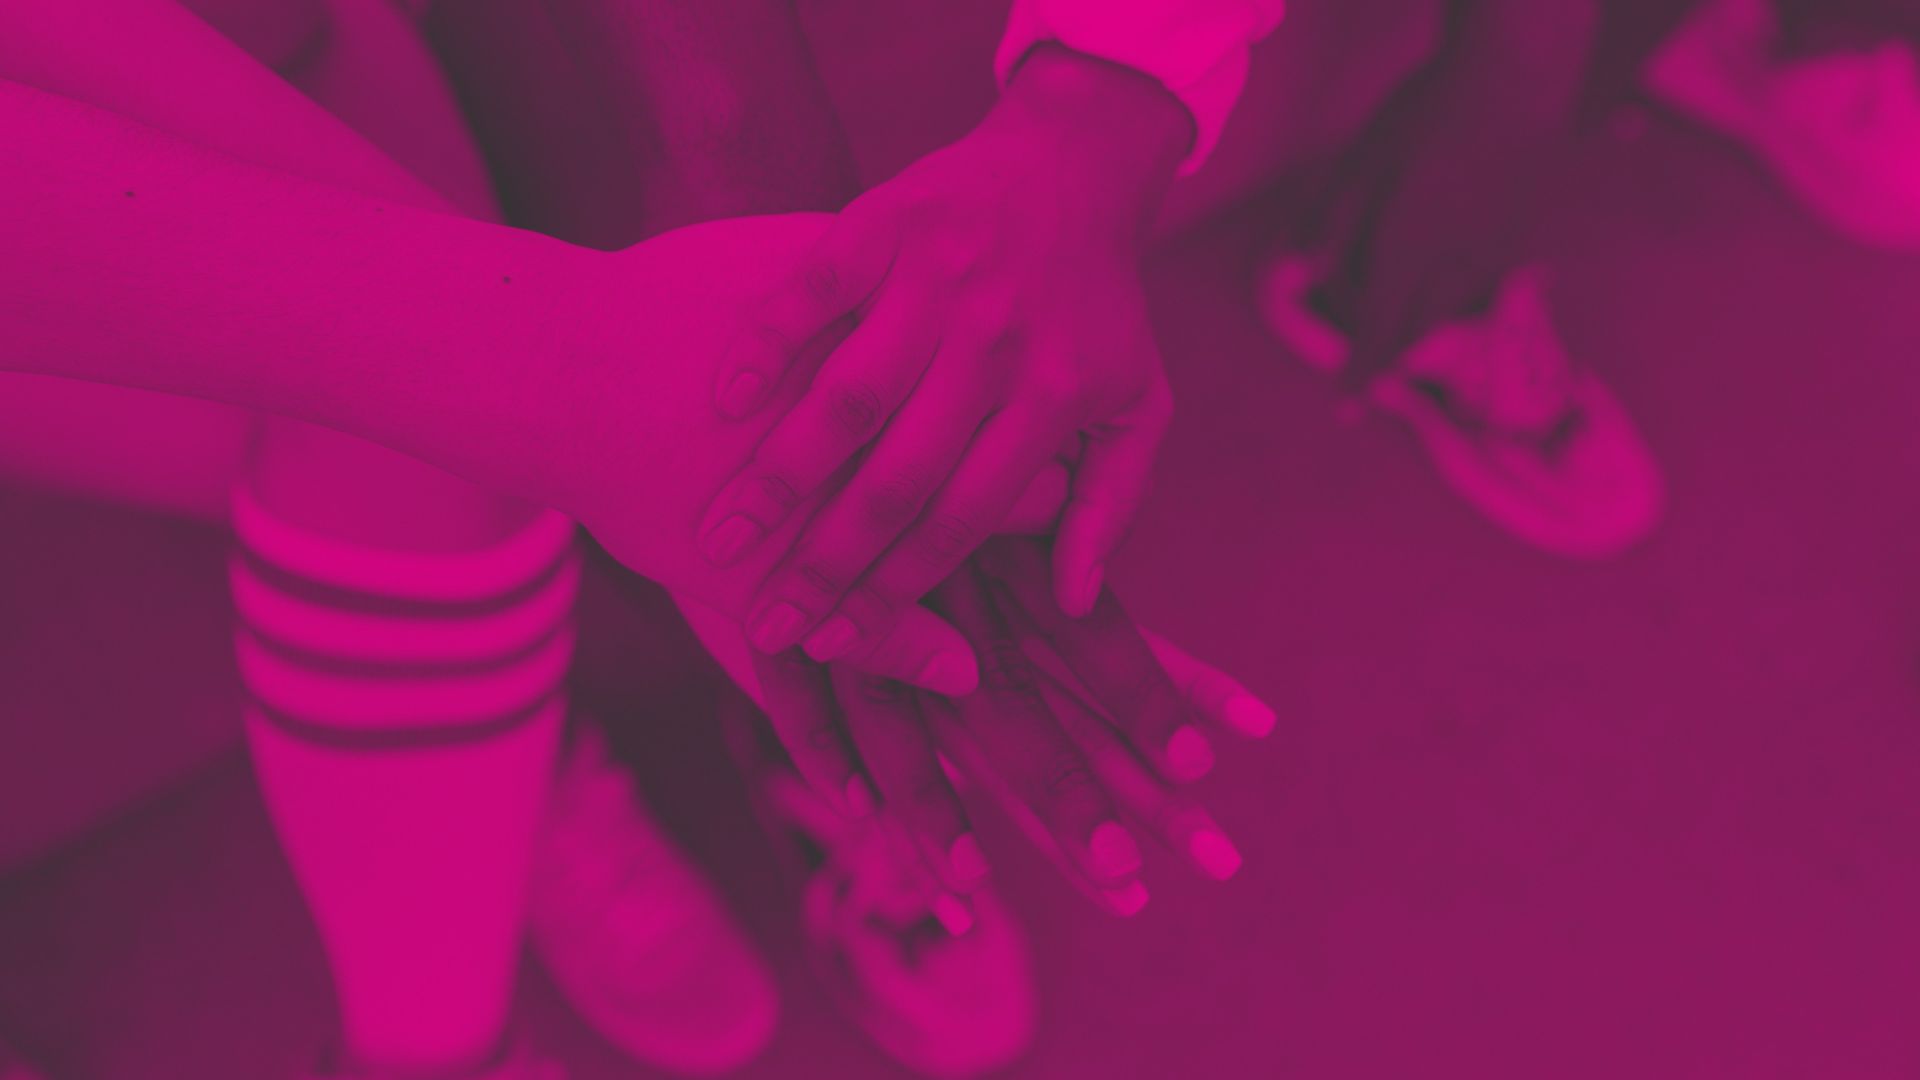 An image of hands on top of one another in a show of solidarity - funding to provide support for disadvantaged children and their families, especially in the cost of living crisis.